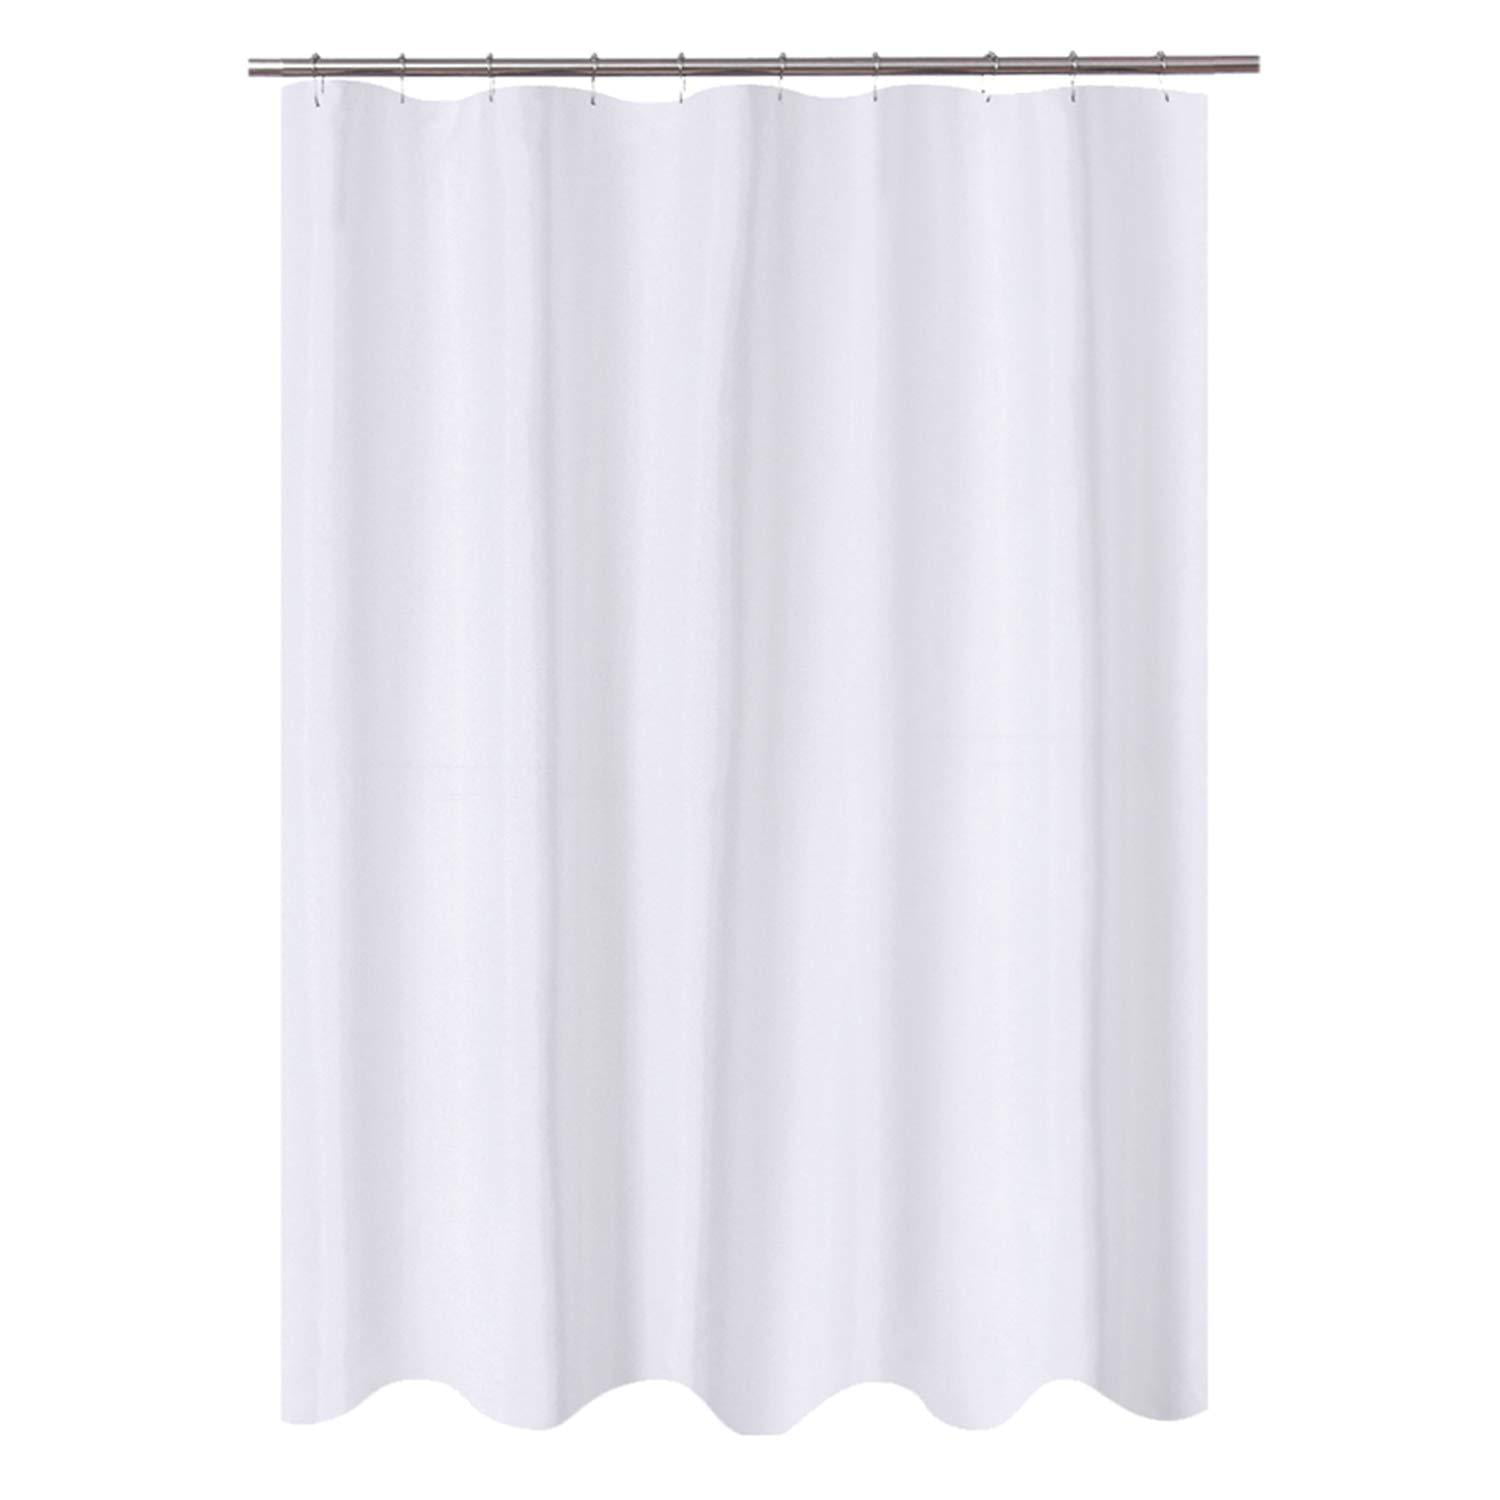 Fabric Shower Curtain Liner, 36 X 70 Shower Curtain Liner